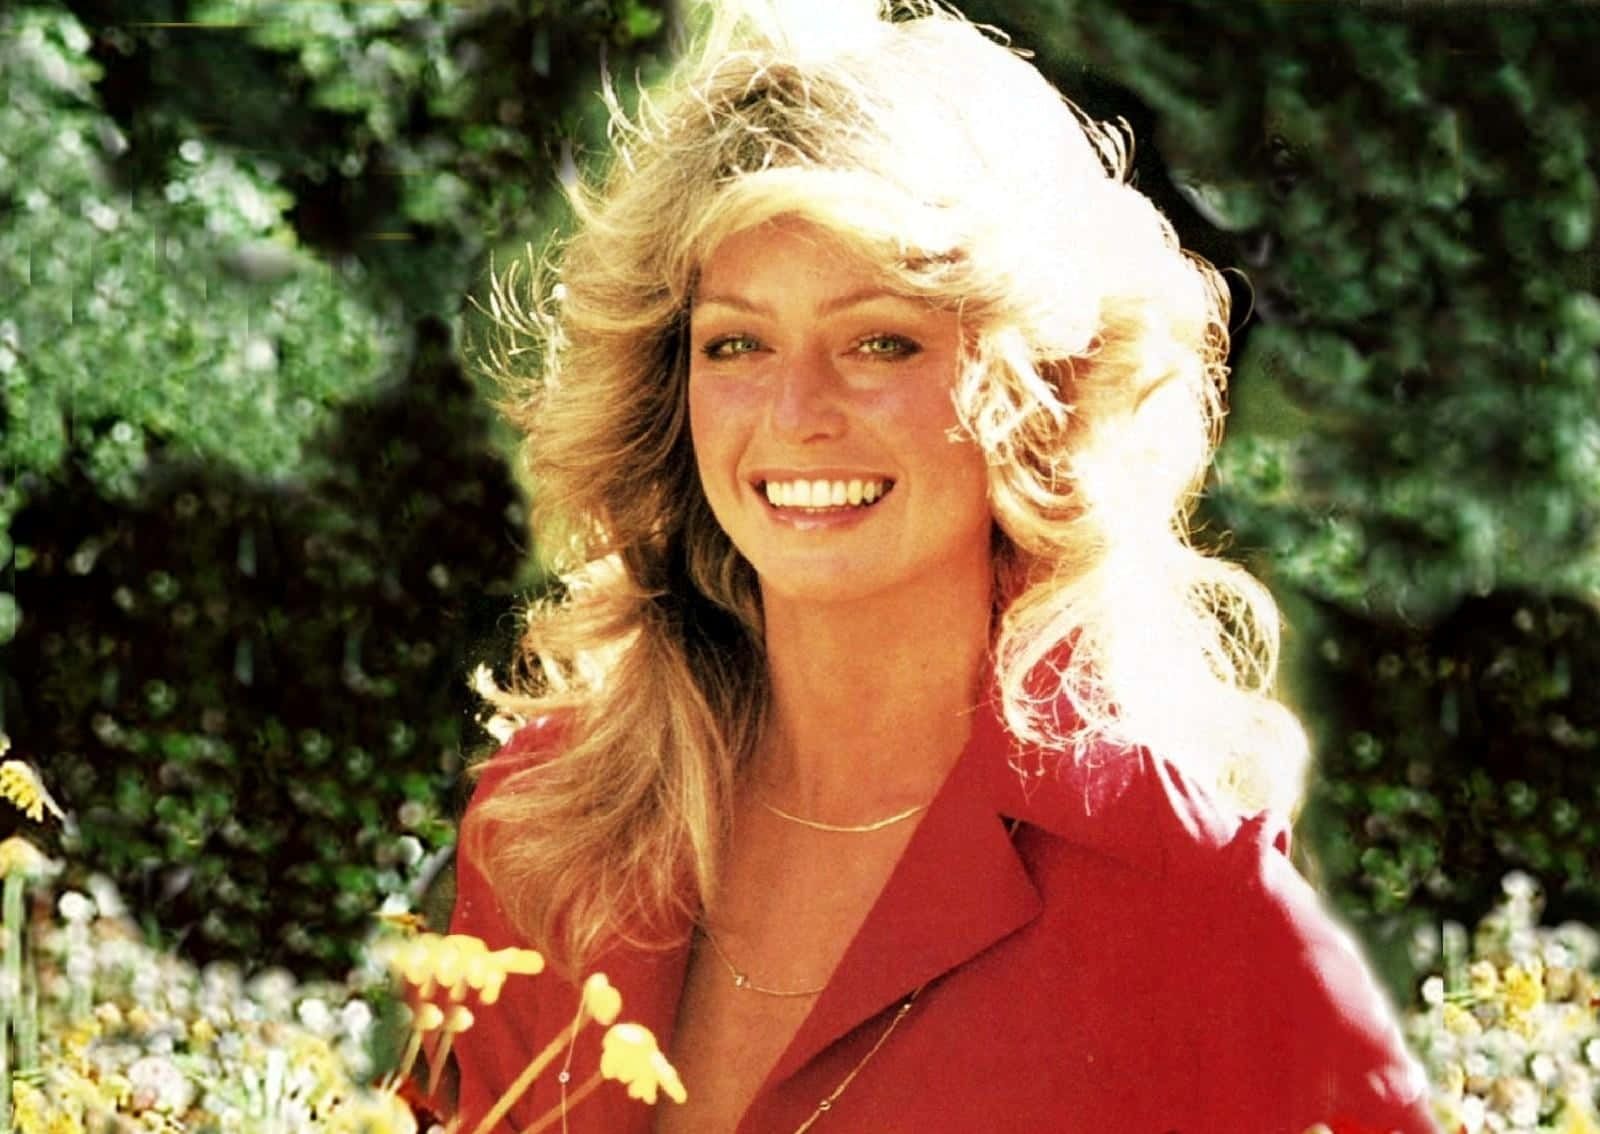 Farrah Fawcett, an American actress and model in the 1970s&1980s